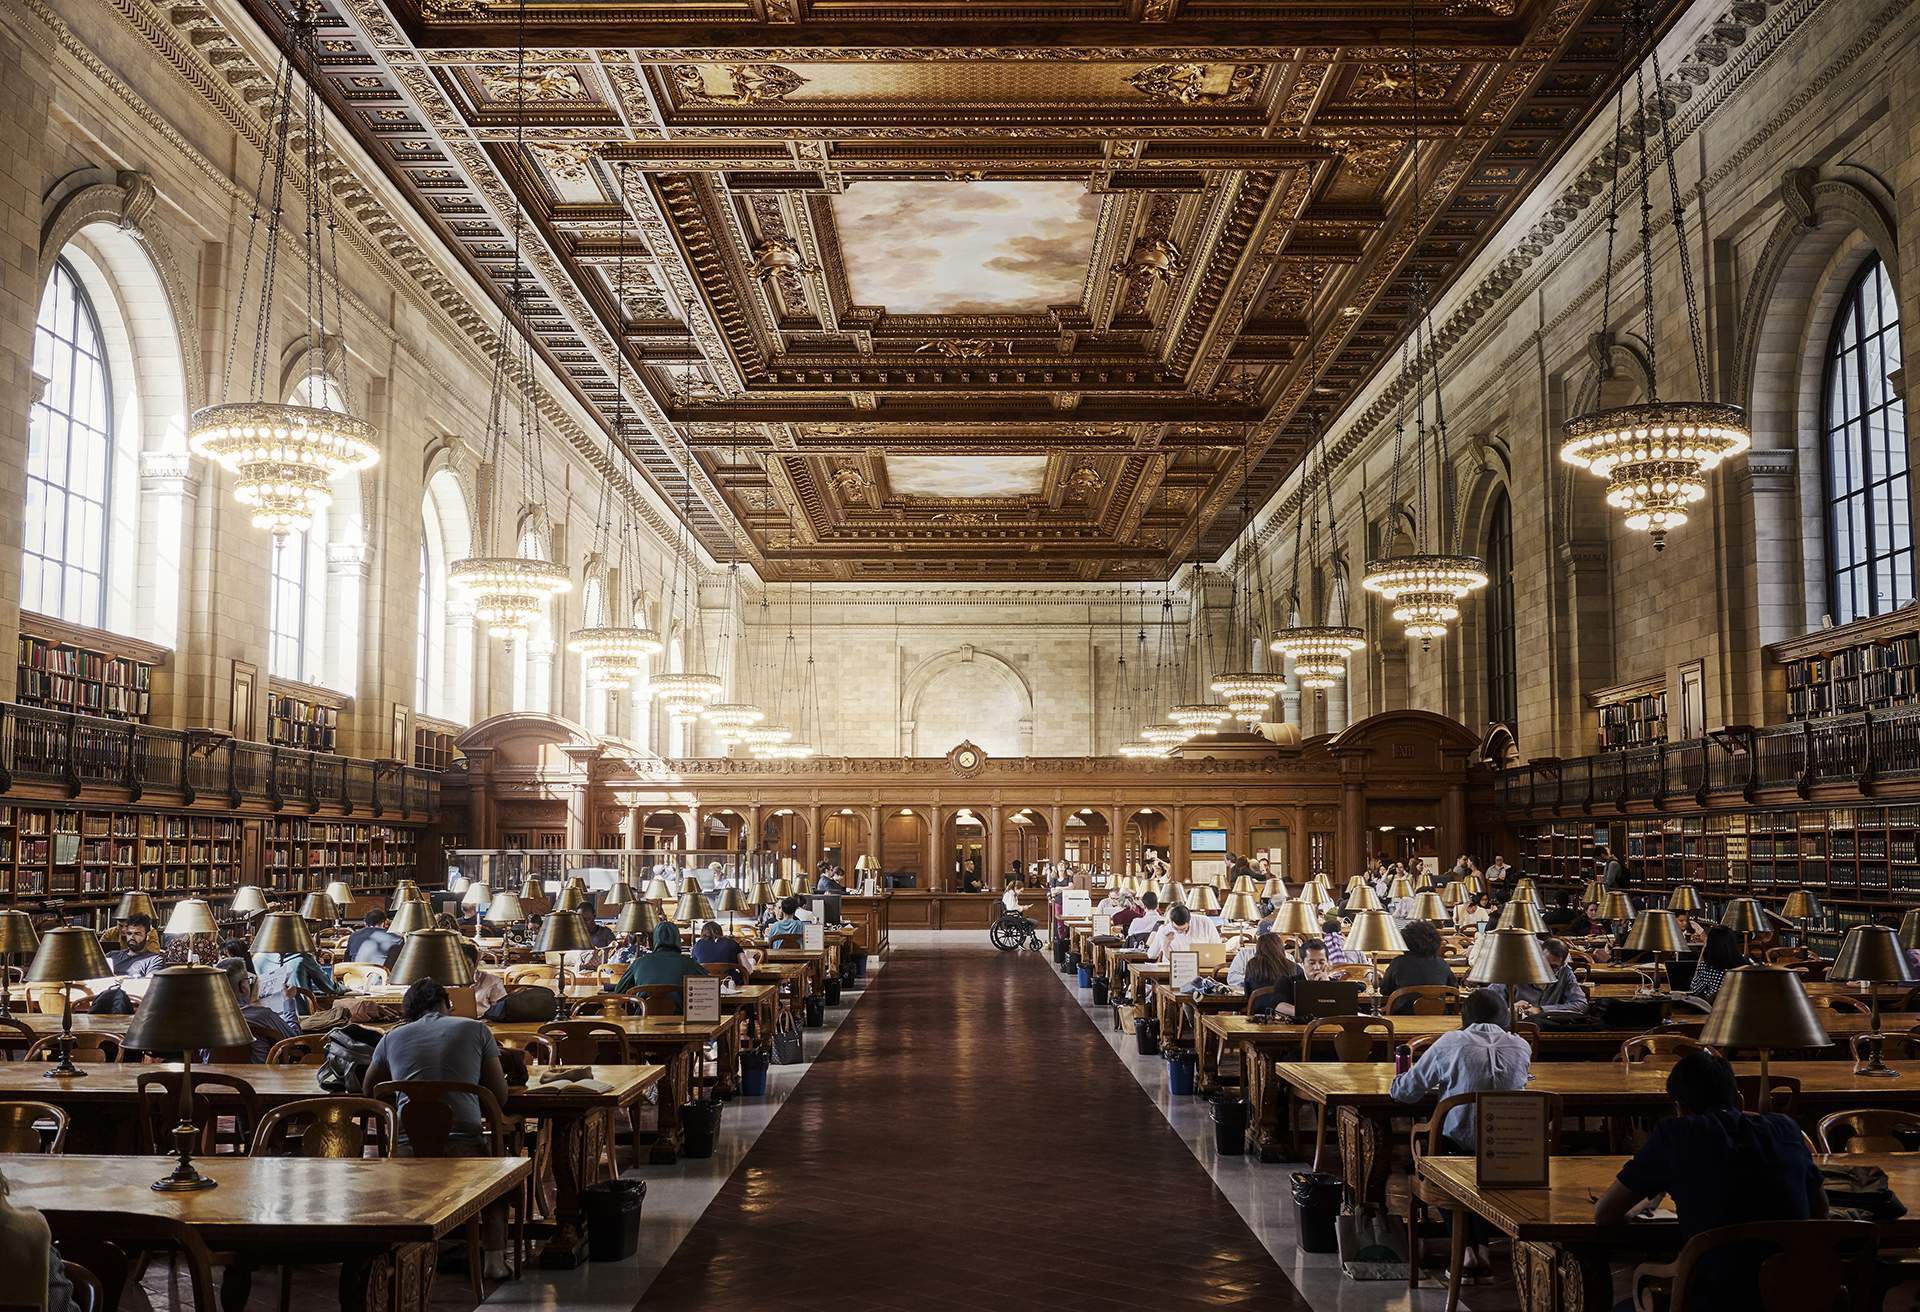 sm_dest_usa_new-york_nyc_new-york-public-library_gettyimages-691318894-copy